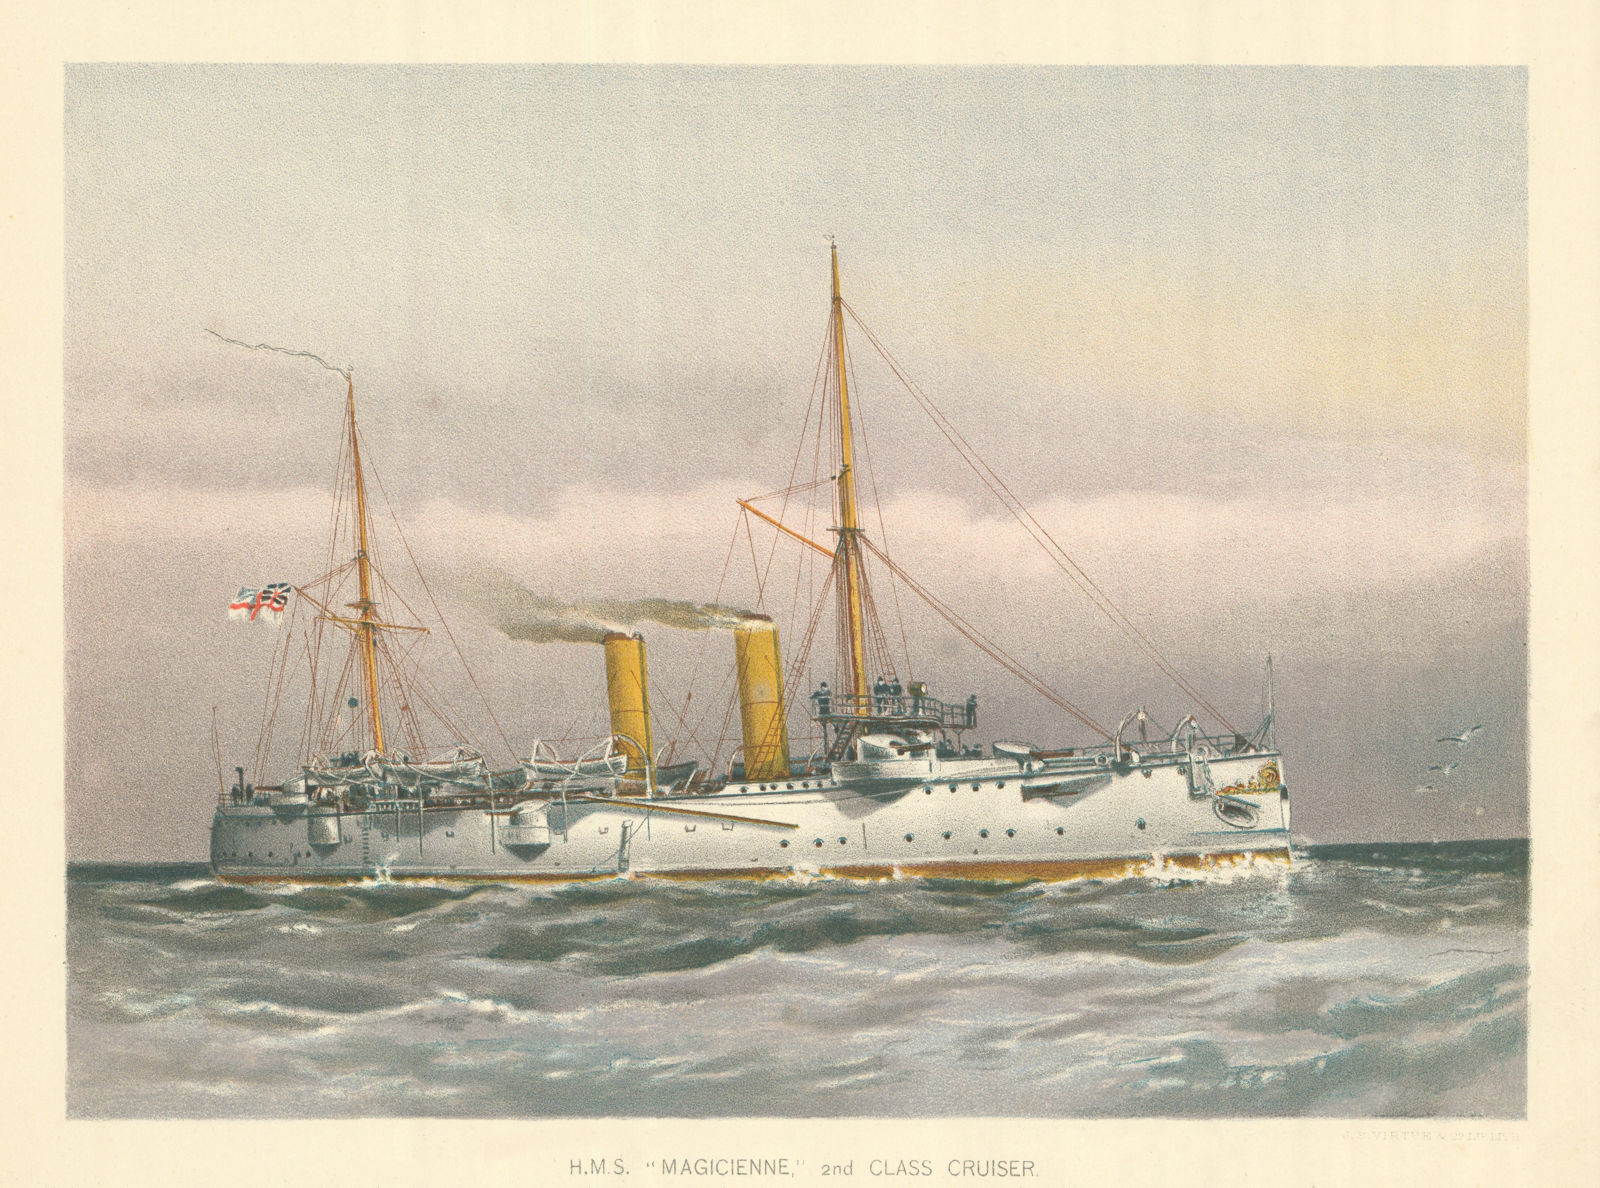 H.M.S. "Magicienne" - 2nd class cruiser (1888) by W.F. Mitchell. Royal Navy 1893